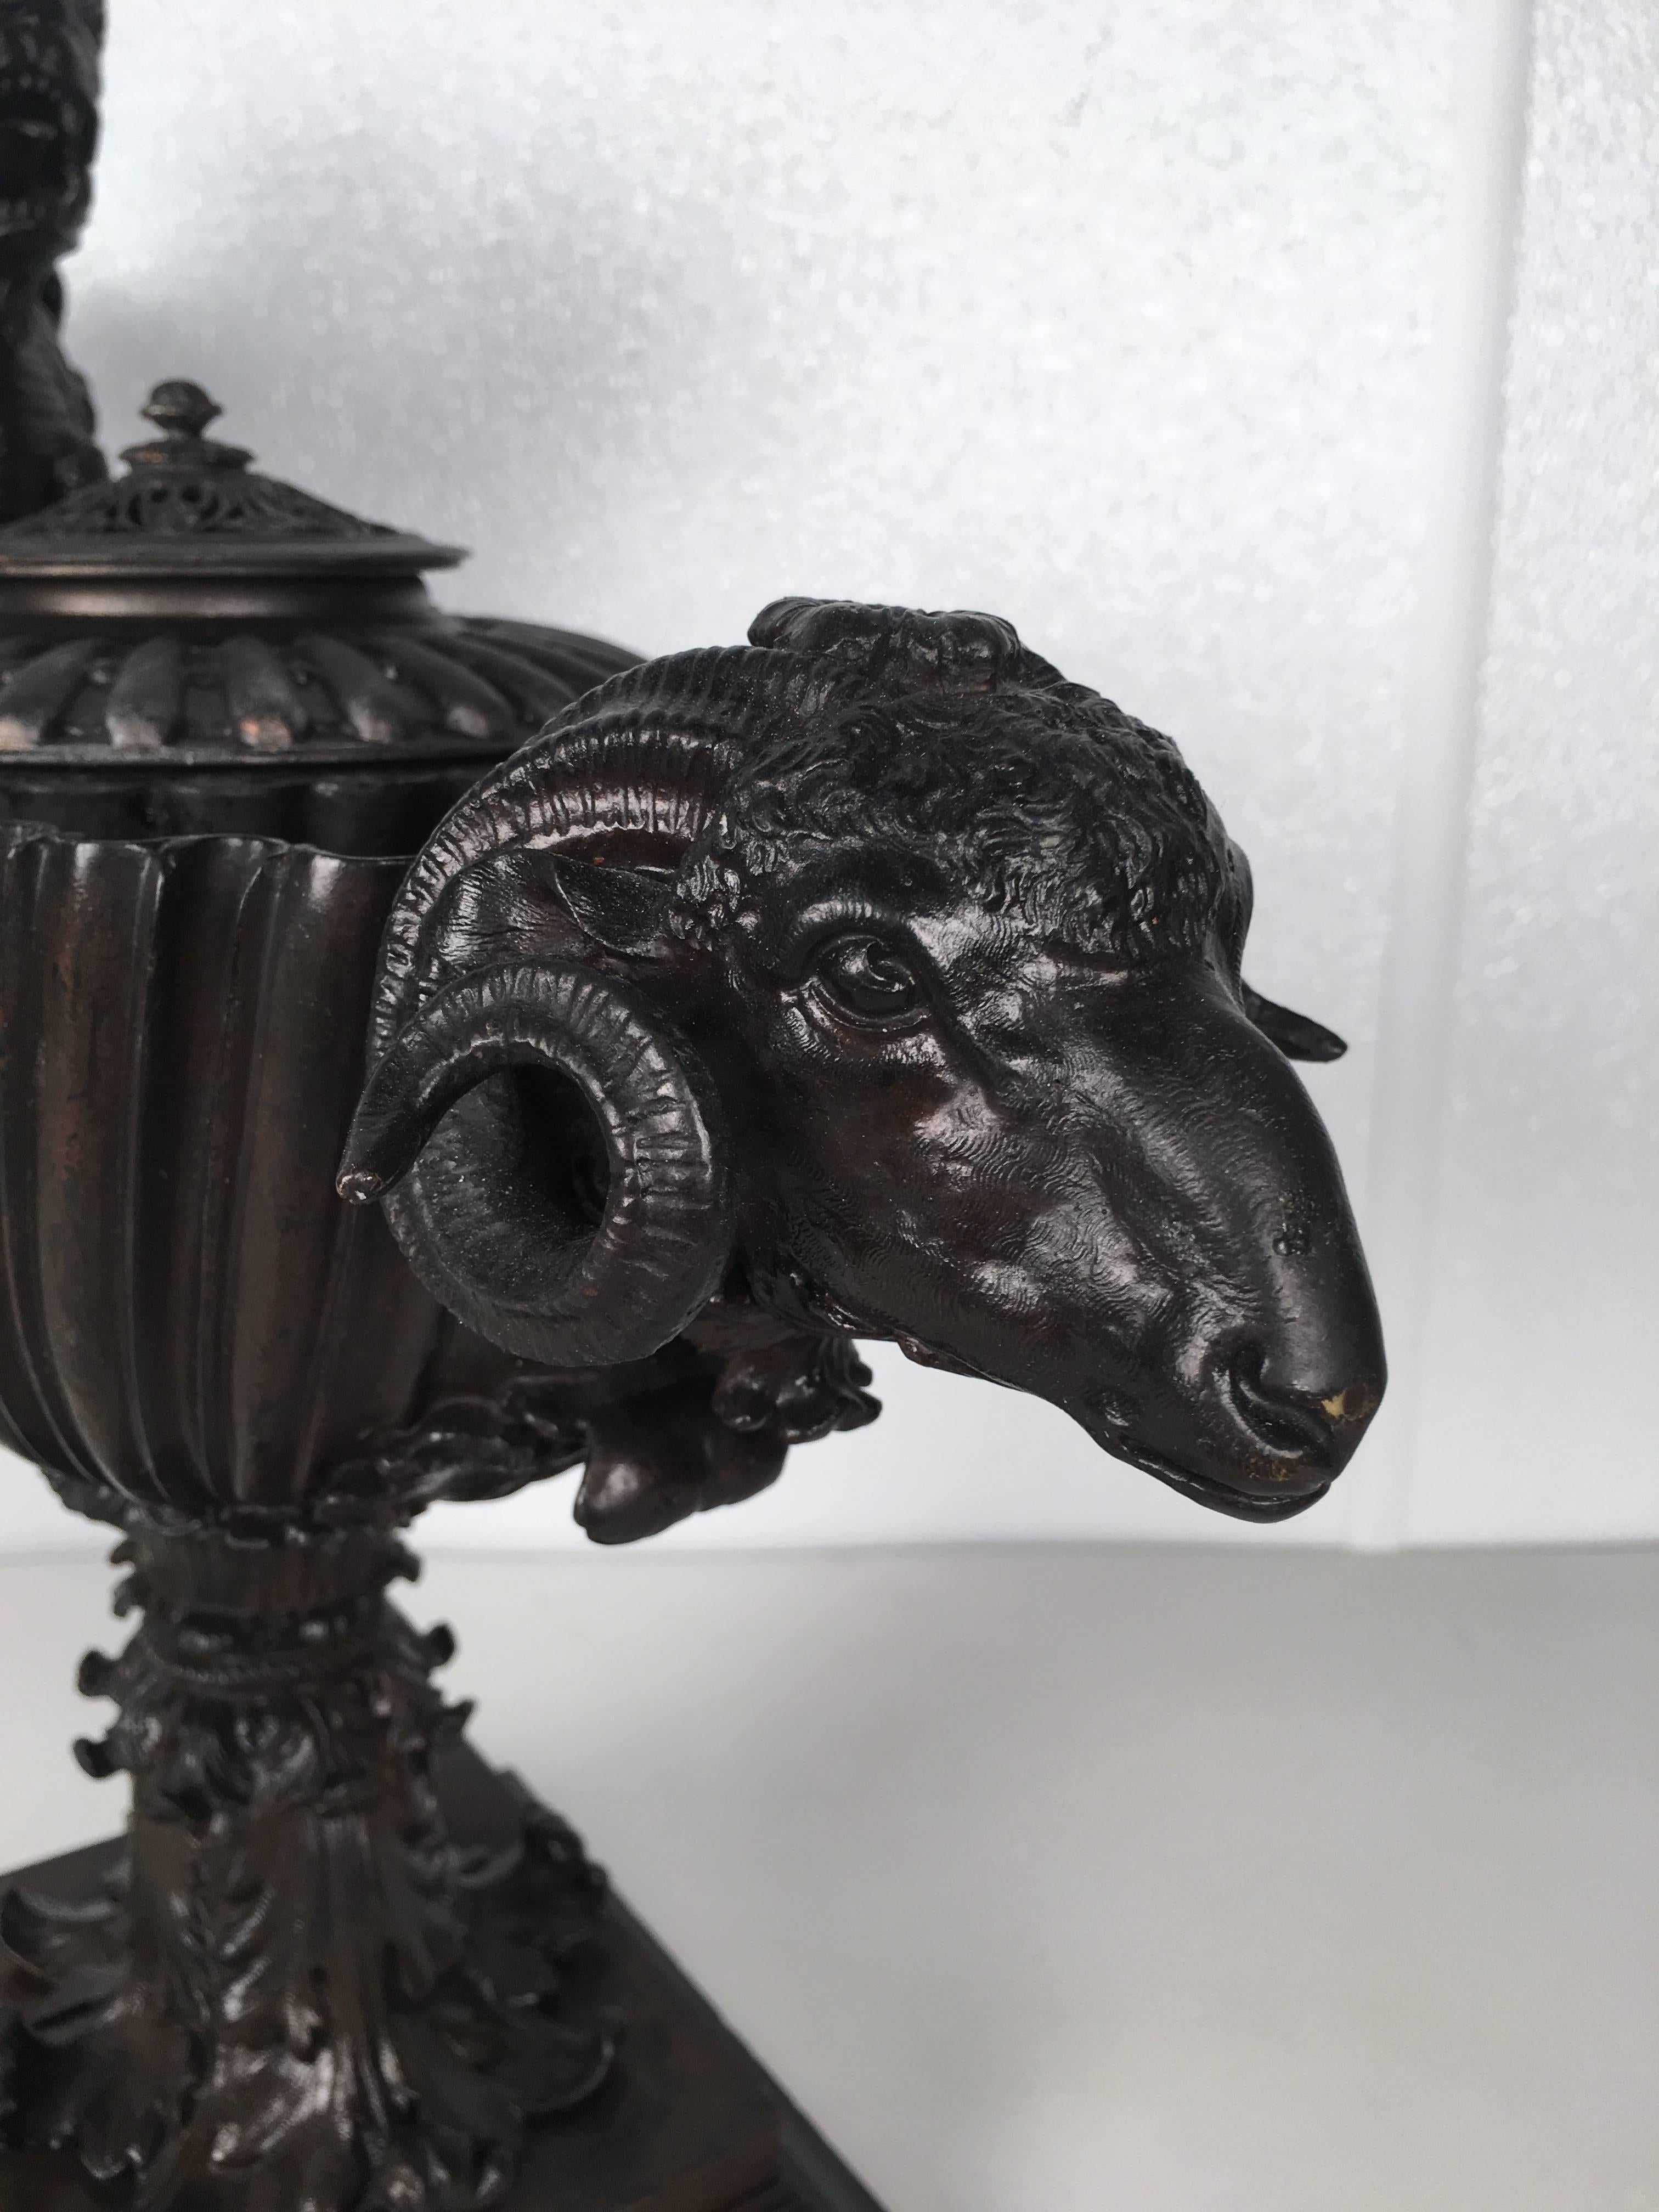 Carved Italian Bronze Oil Lamp Founderia Nelli, Roma, after the Antique